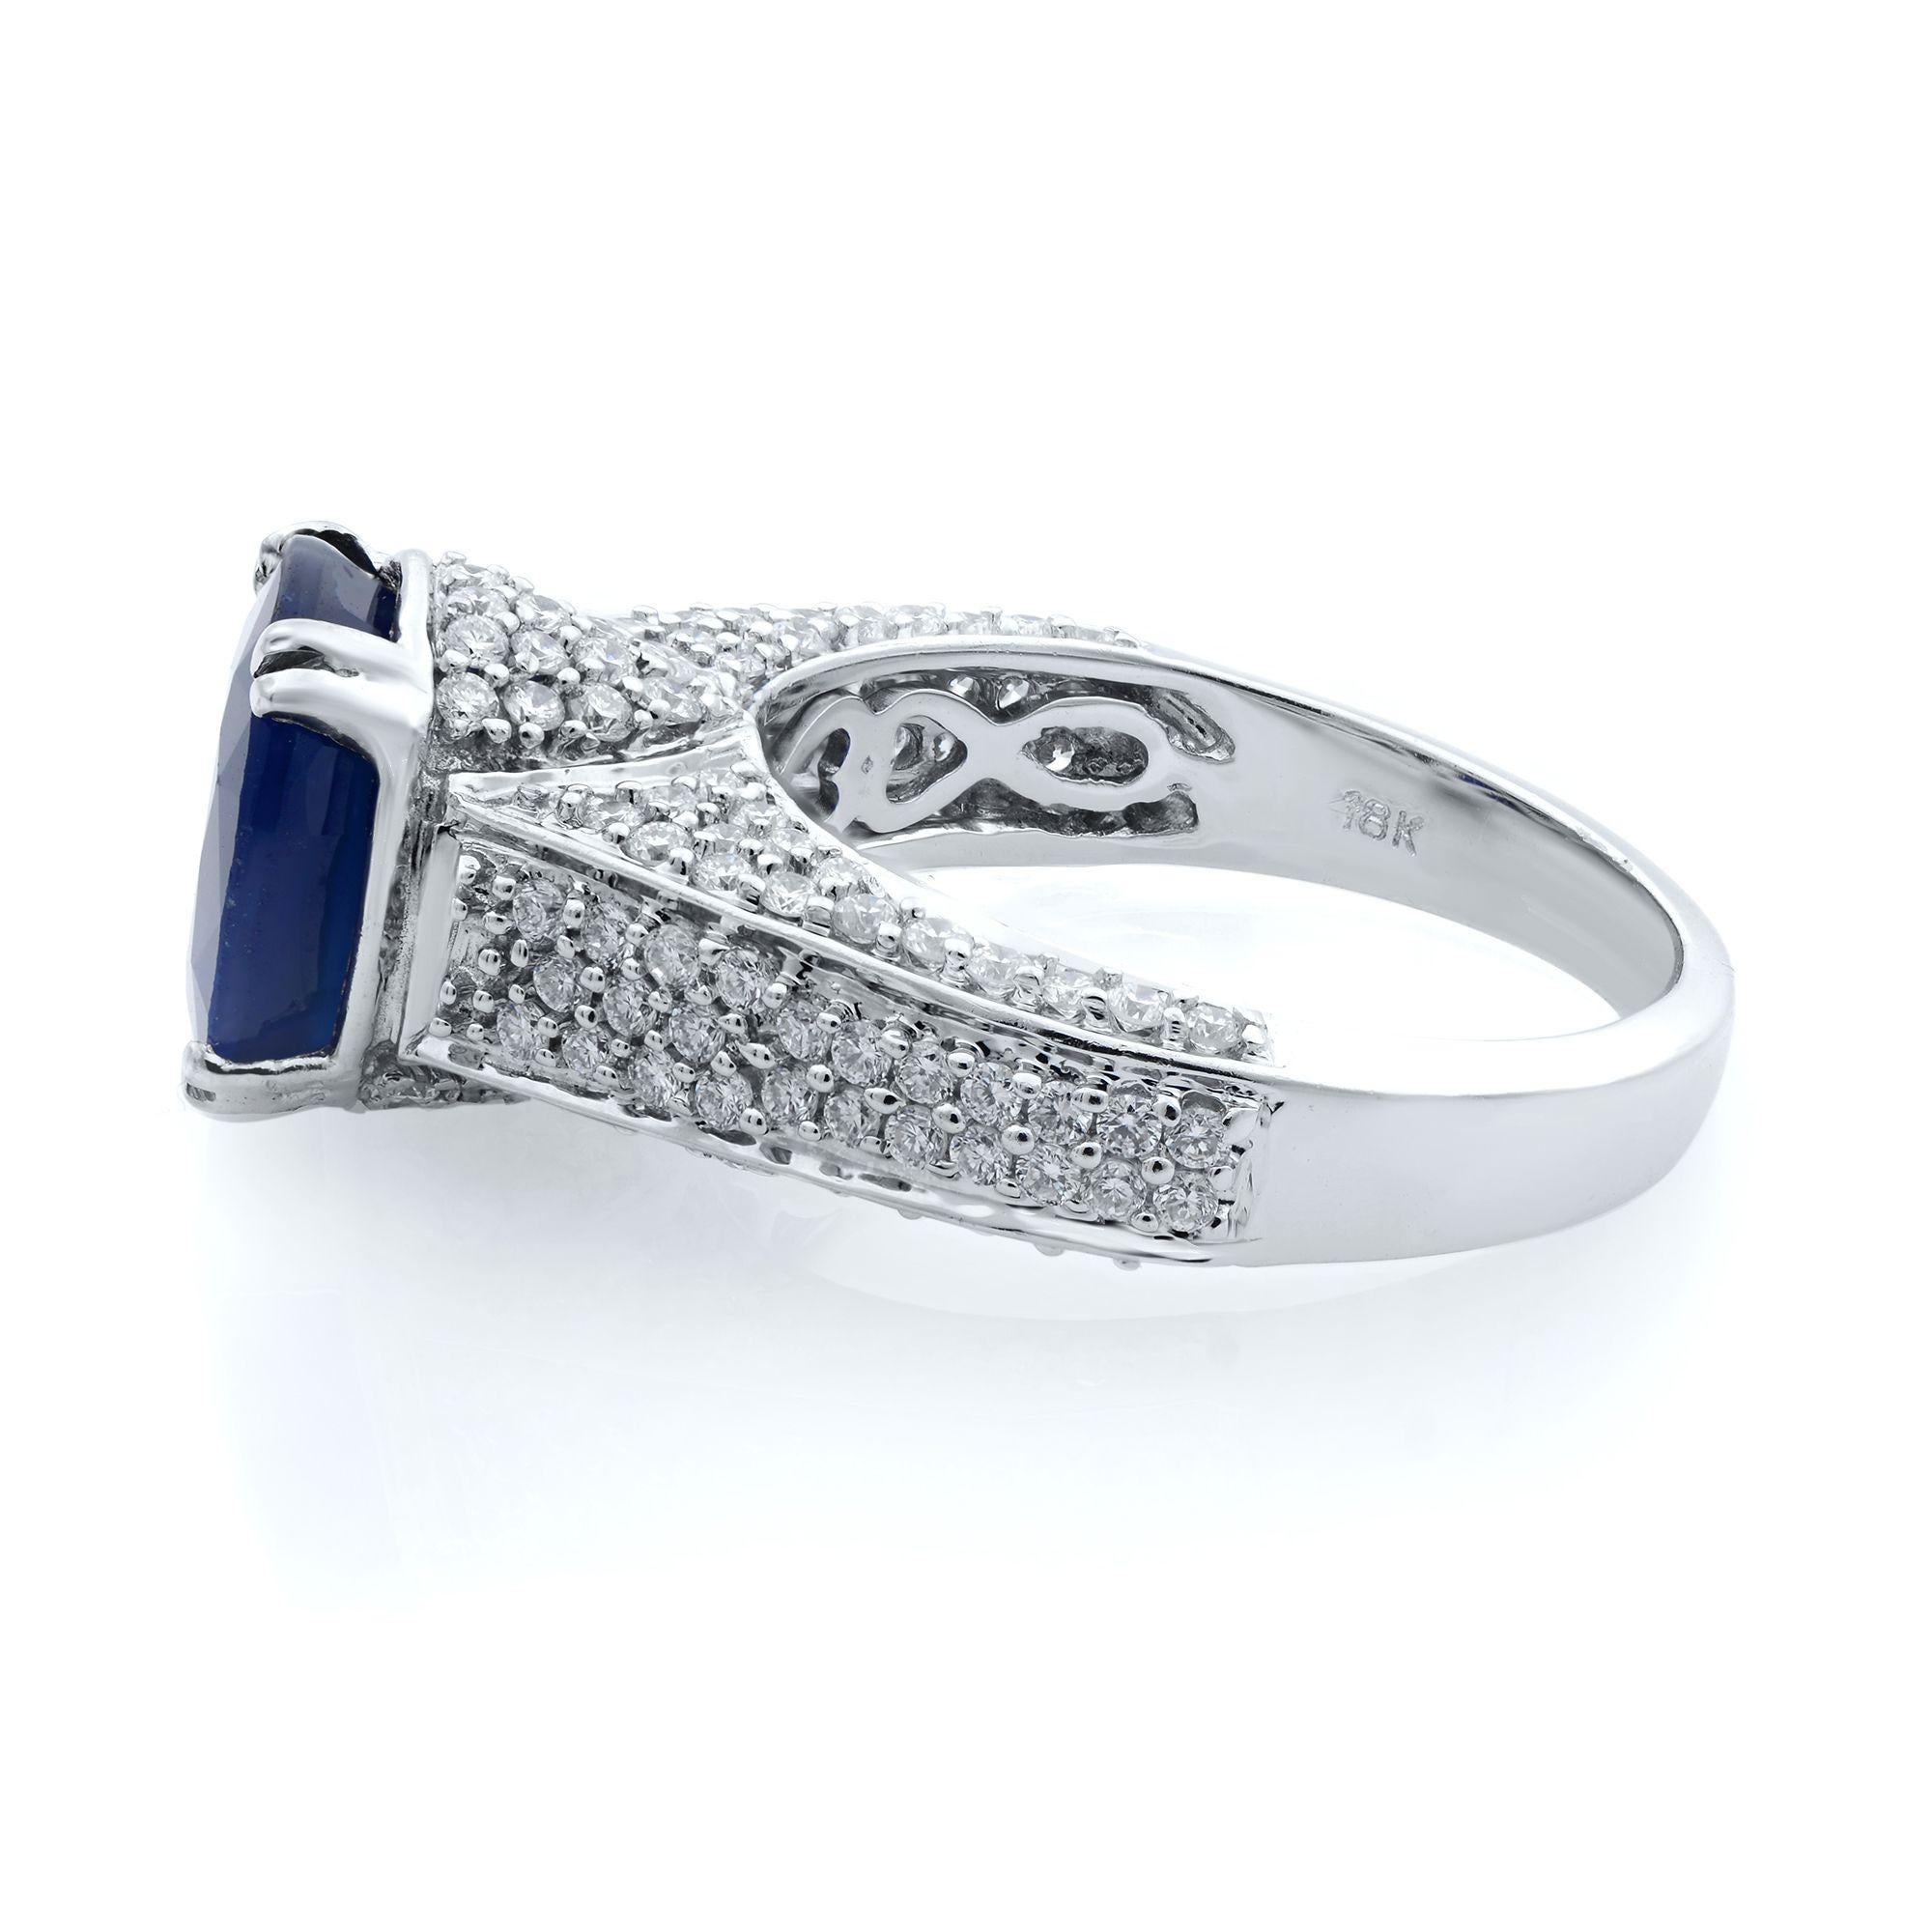 This glamorous blue oval Sapphire engagement ring secures the center gem with elegant double prongs and features pave diamonds, all over the shank. This setting style that allows light to reach the diamonds from multiple angles and enhances their